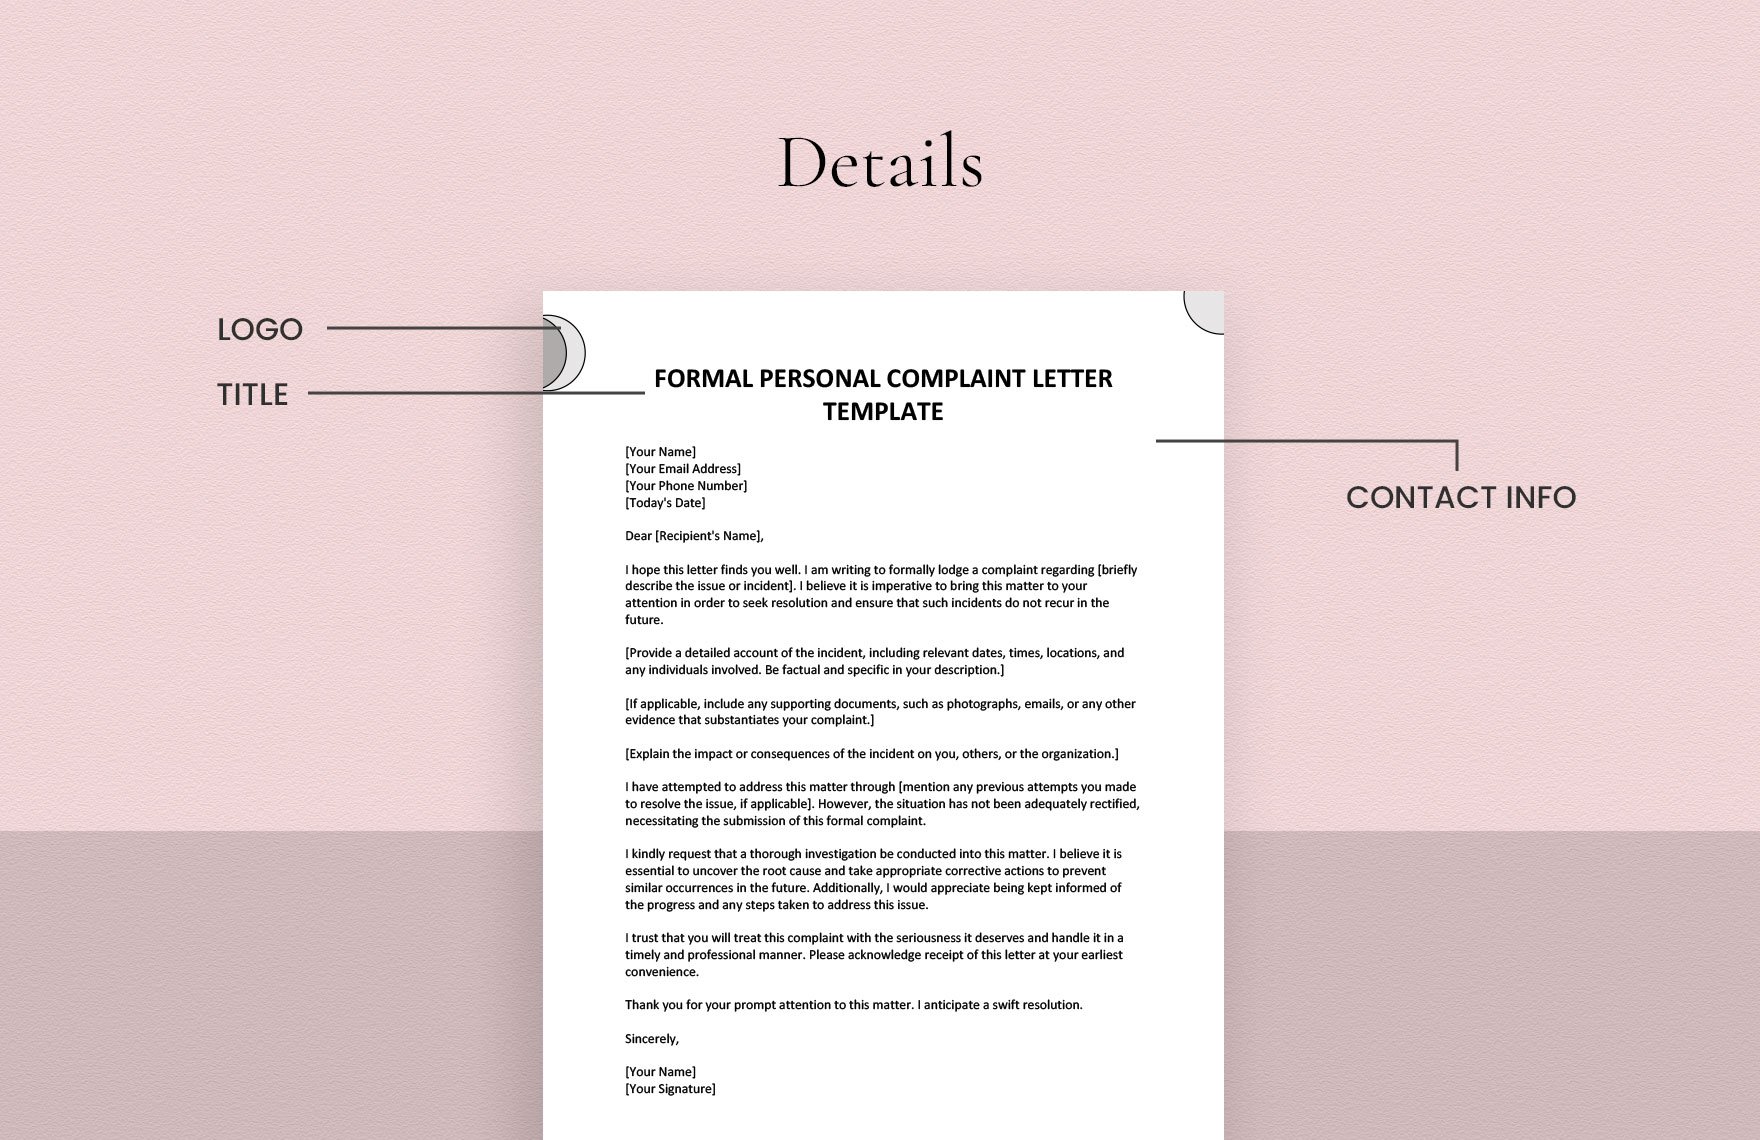 Formal Personal Complaint Letter Template